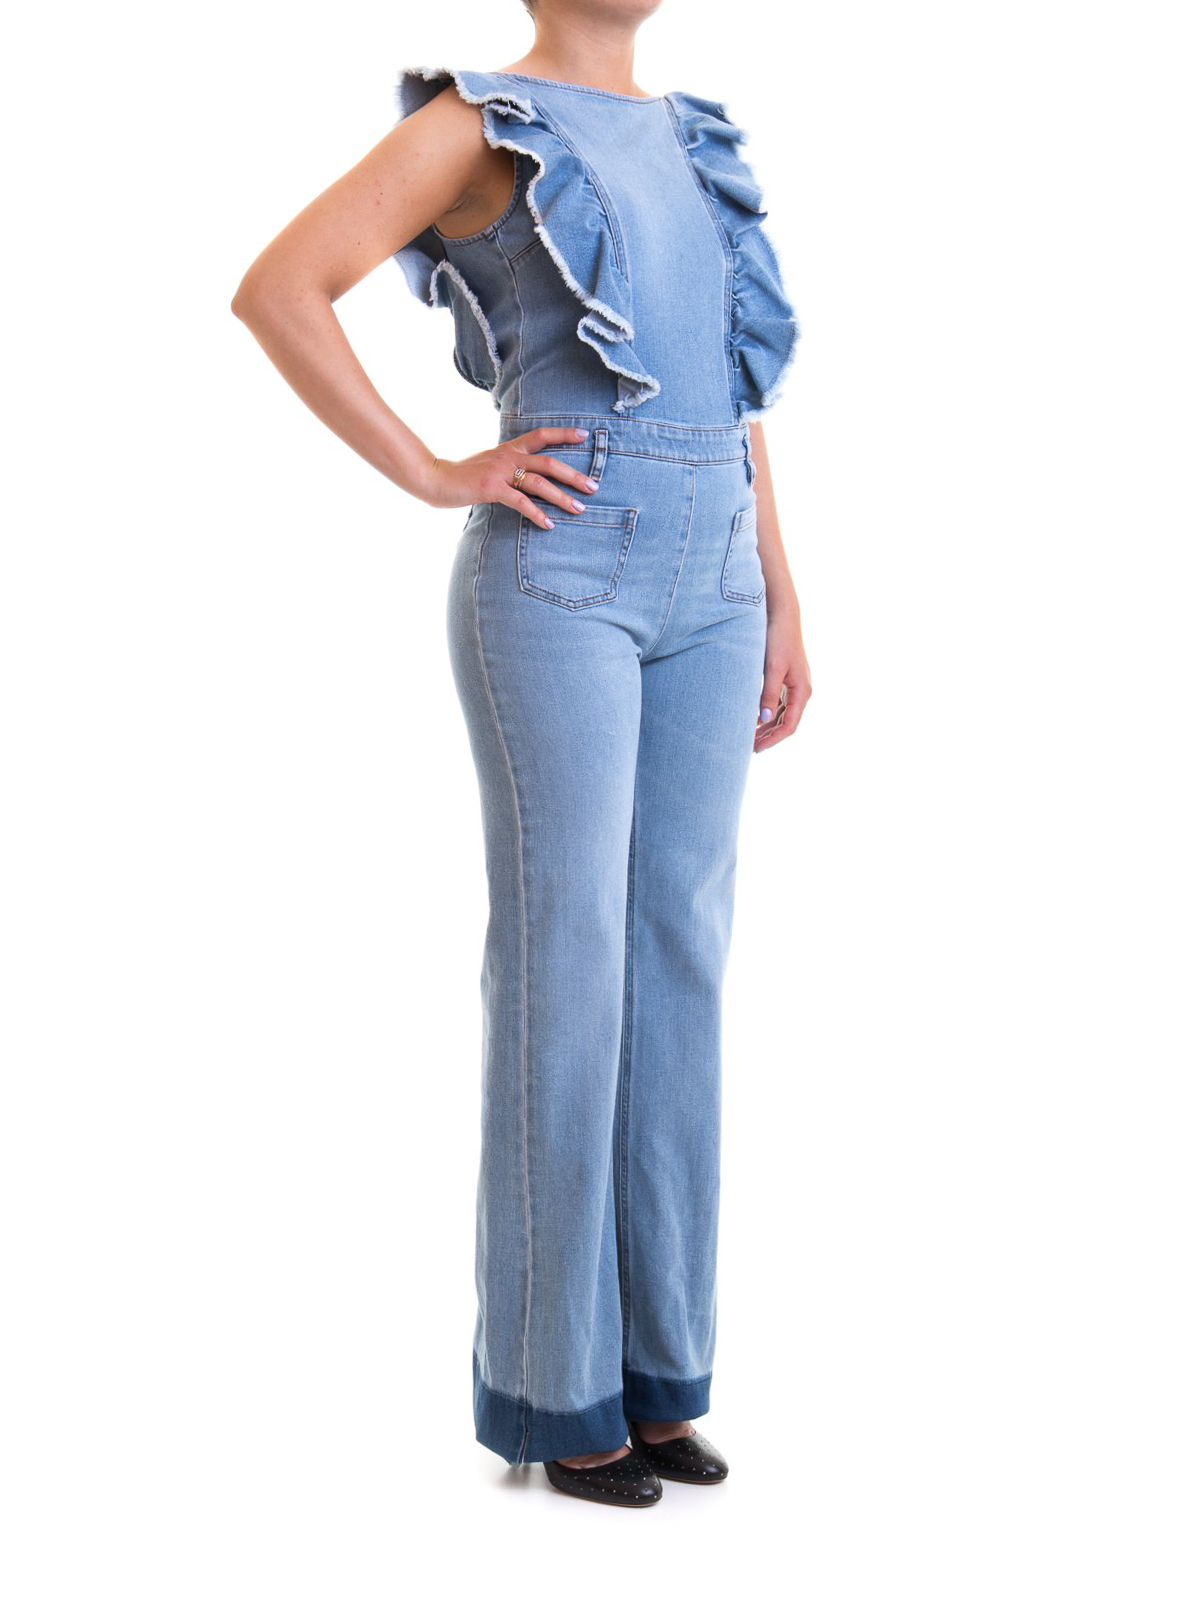 Denim Jumpsuits and rompers for Women | Lyst